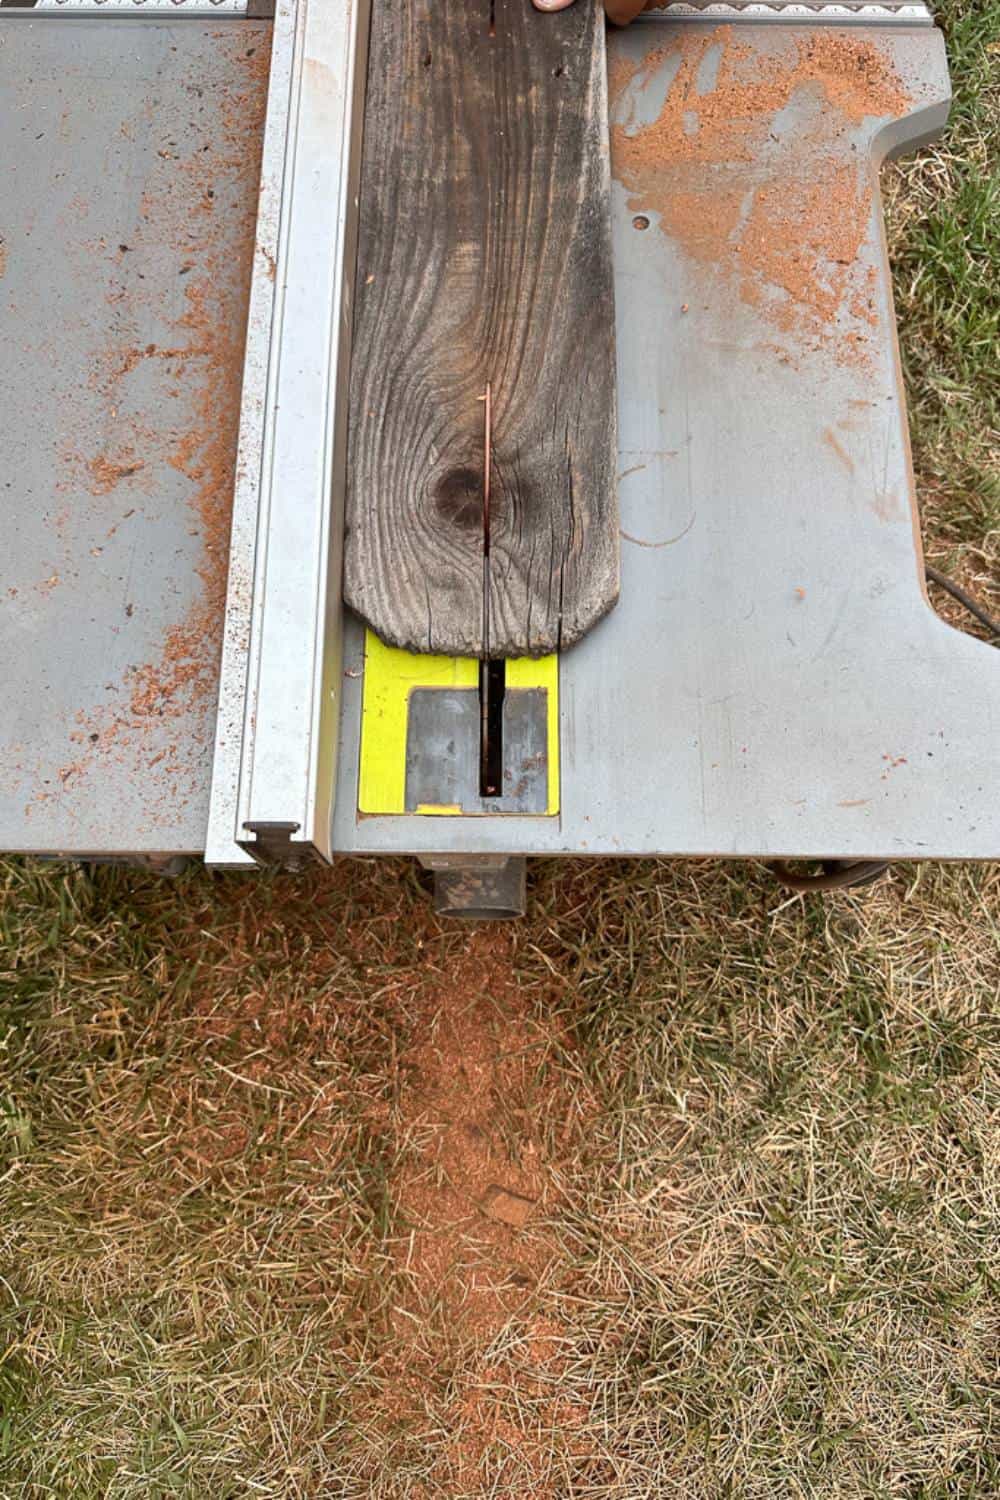 Table saw cutting fence posts 